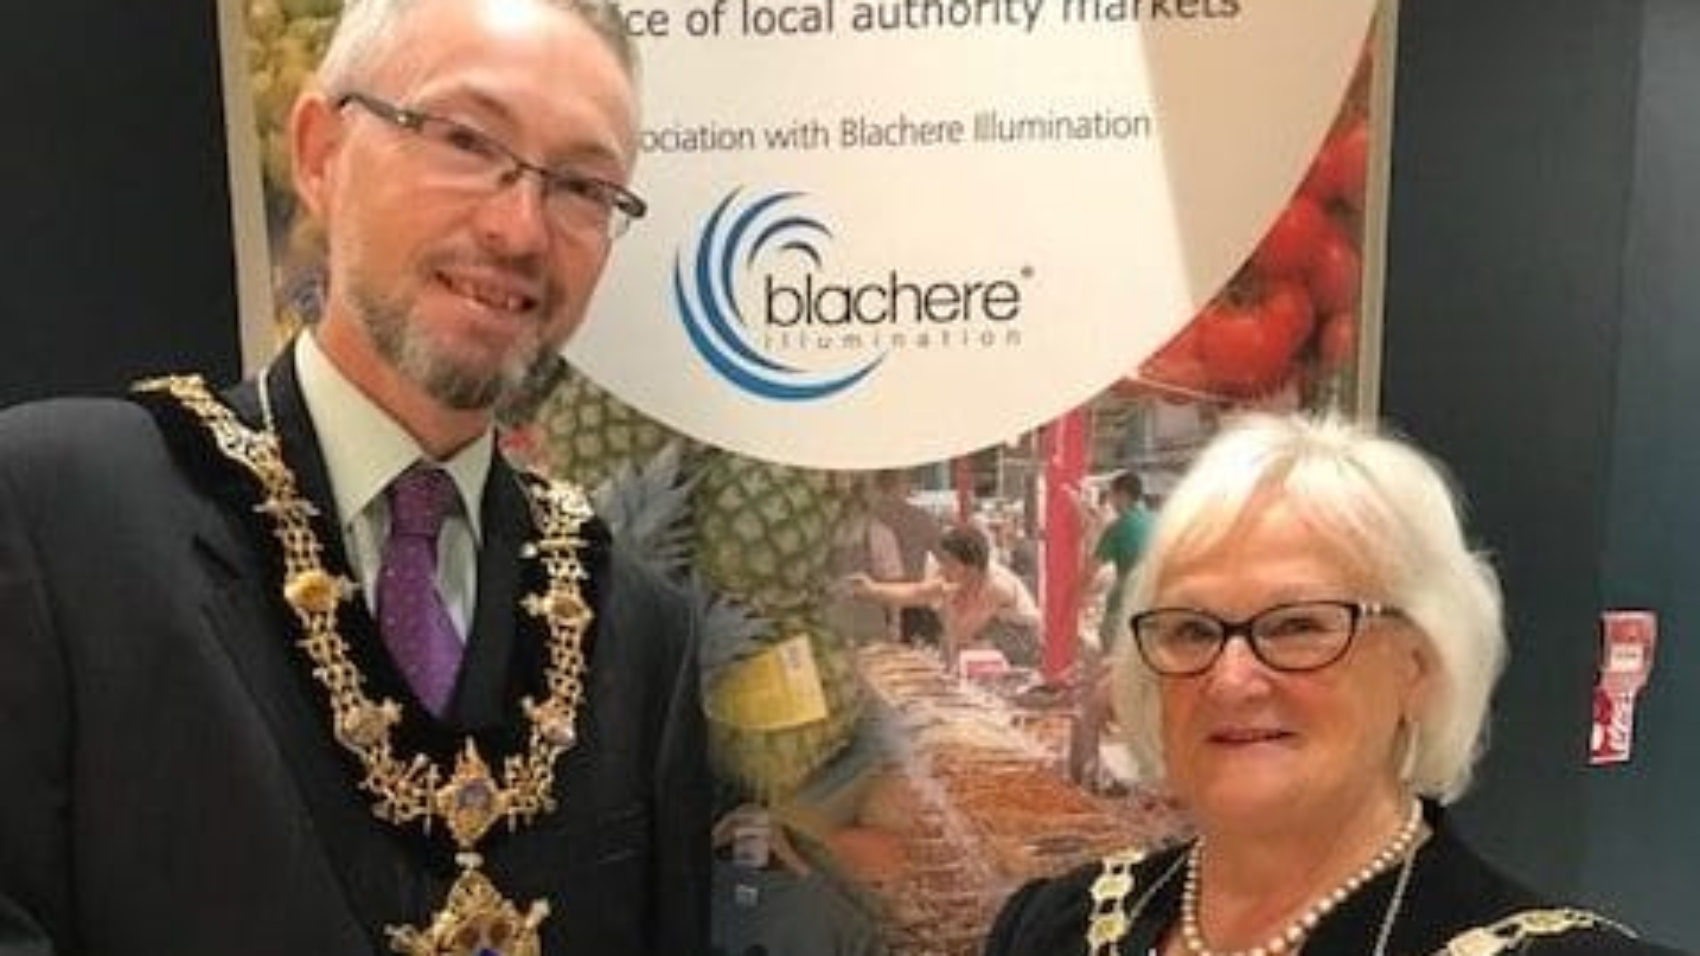 Councillor Mrs Geraldine Carter, was welcomed to the town by the mayor Straford upon Avon, Councillor John Bicknell